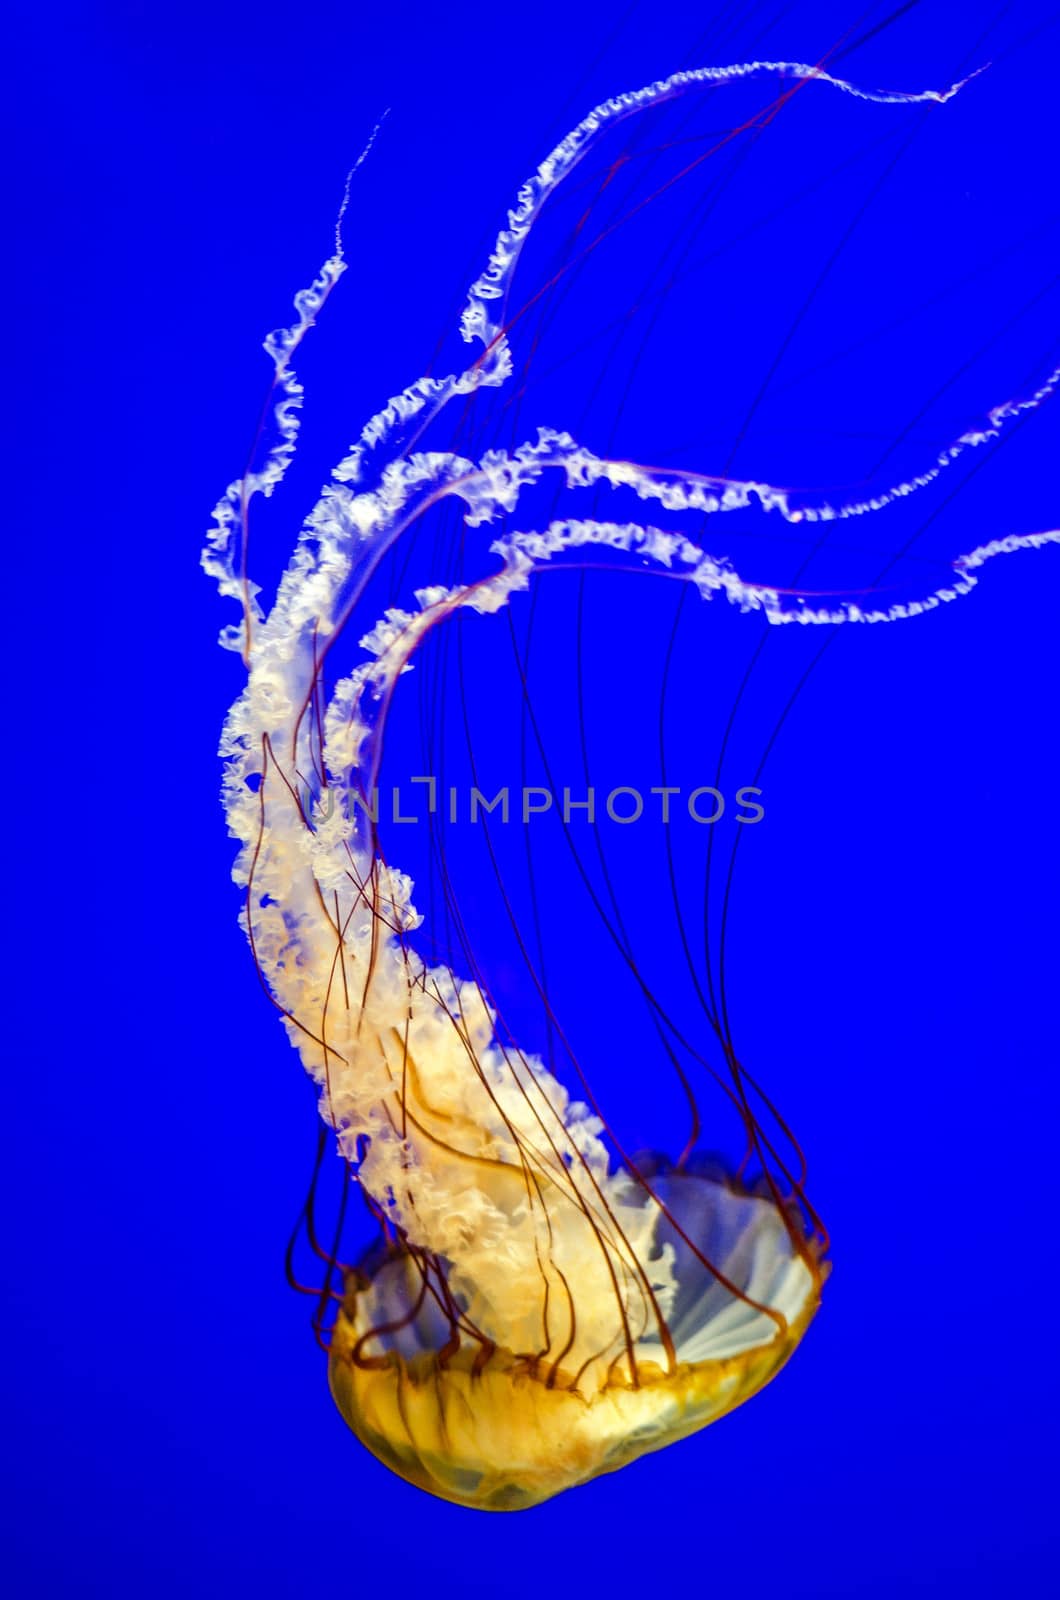 Vertical view of an orange Sea Nettle Jellyfish against a beautiful blue background